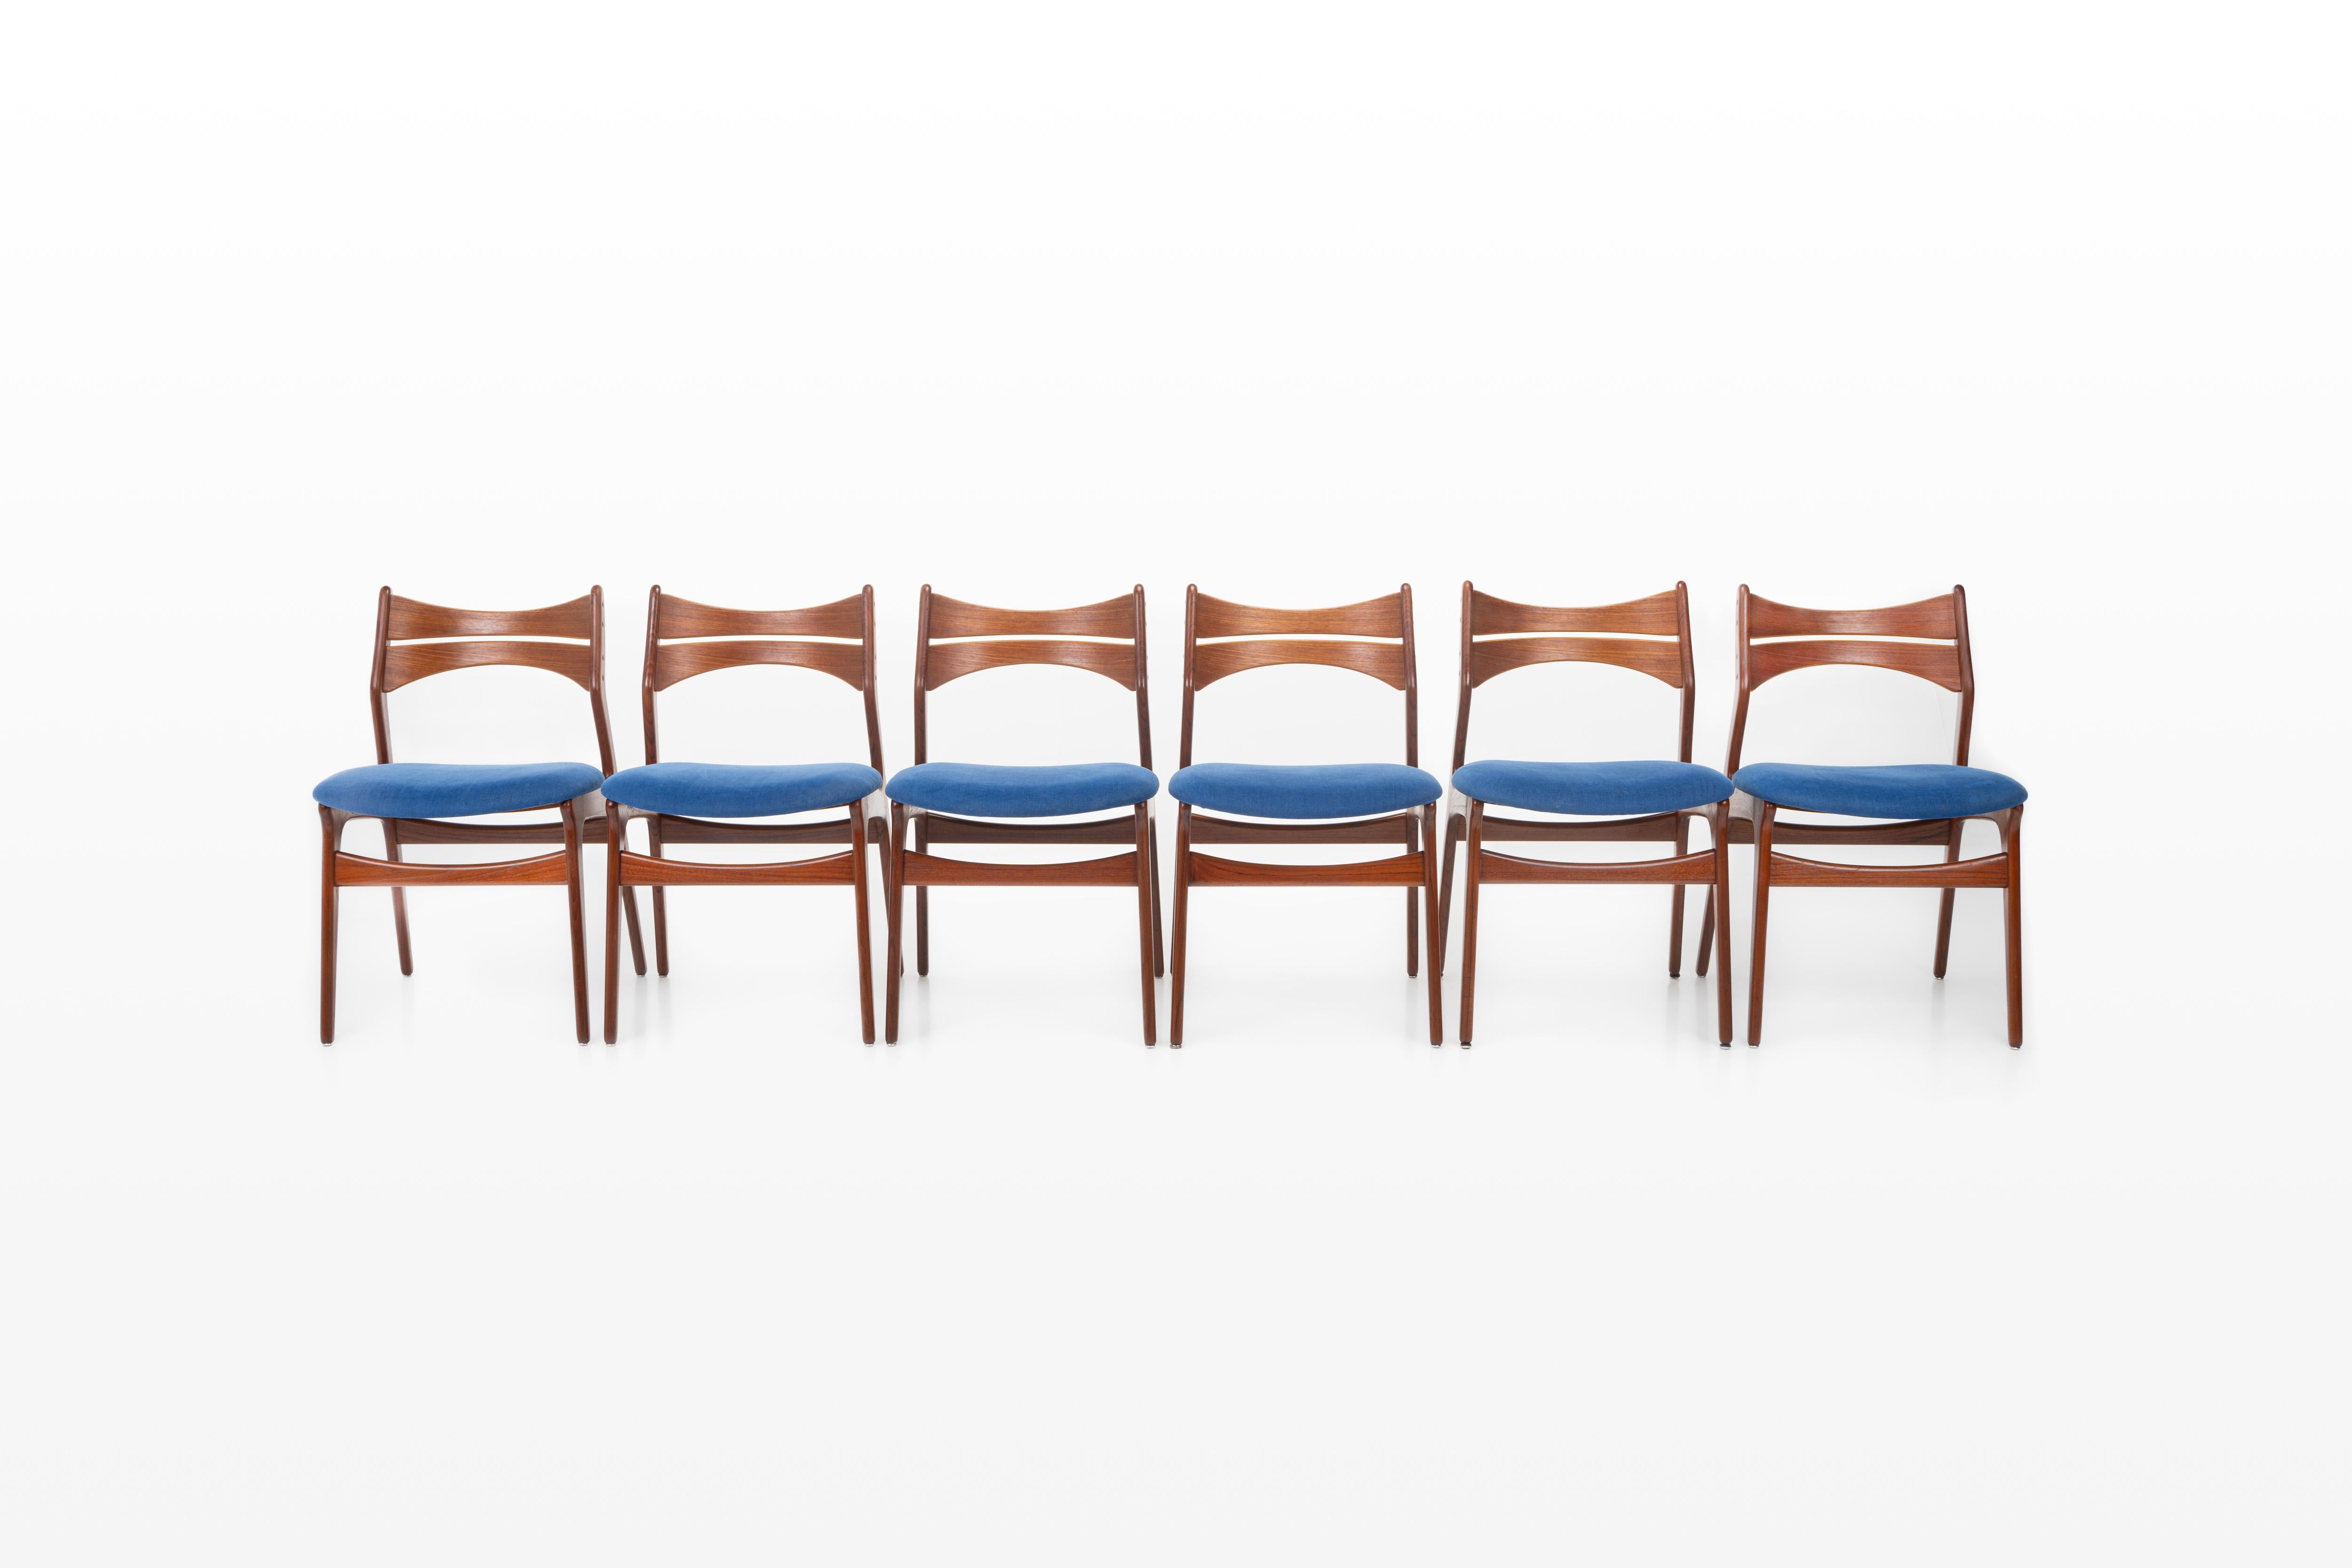 Set of six 'Model 310' dining chairs designed by Erik Buch for Christian Christensen Møbelfabrik, Denmark 1960s. The chairs have a teak frame and have a blue fabric seat.

Dimensions:
W: 50 cm
D: 52 cm
H: 82 cm